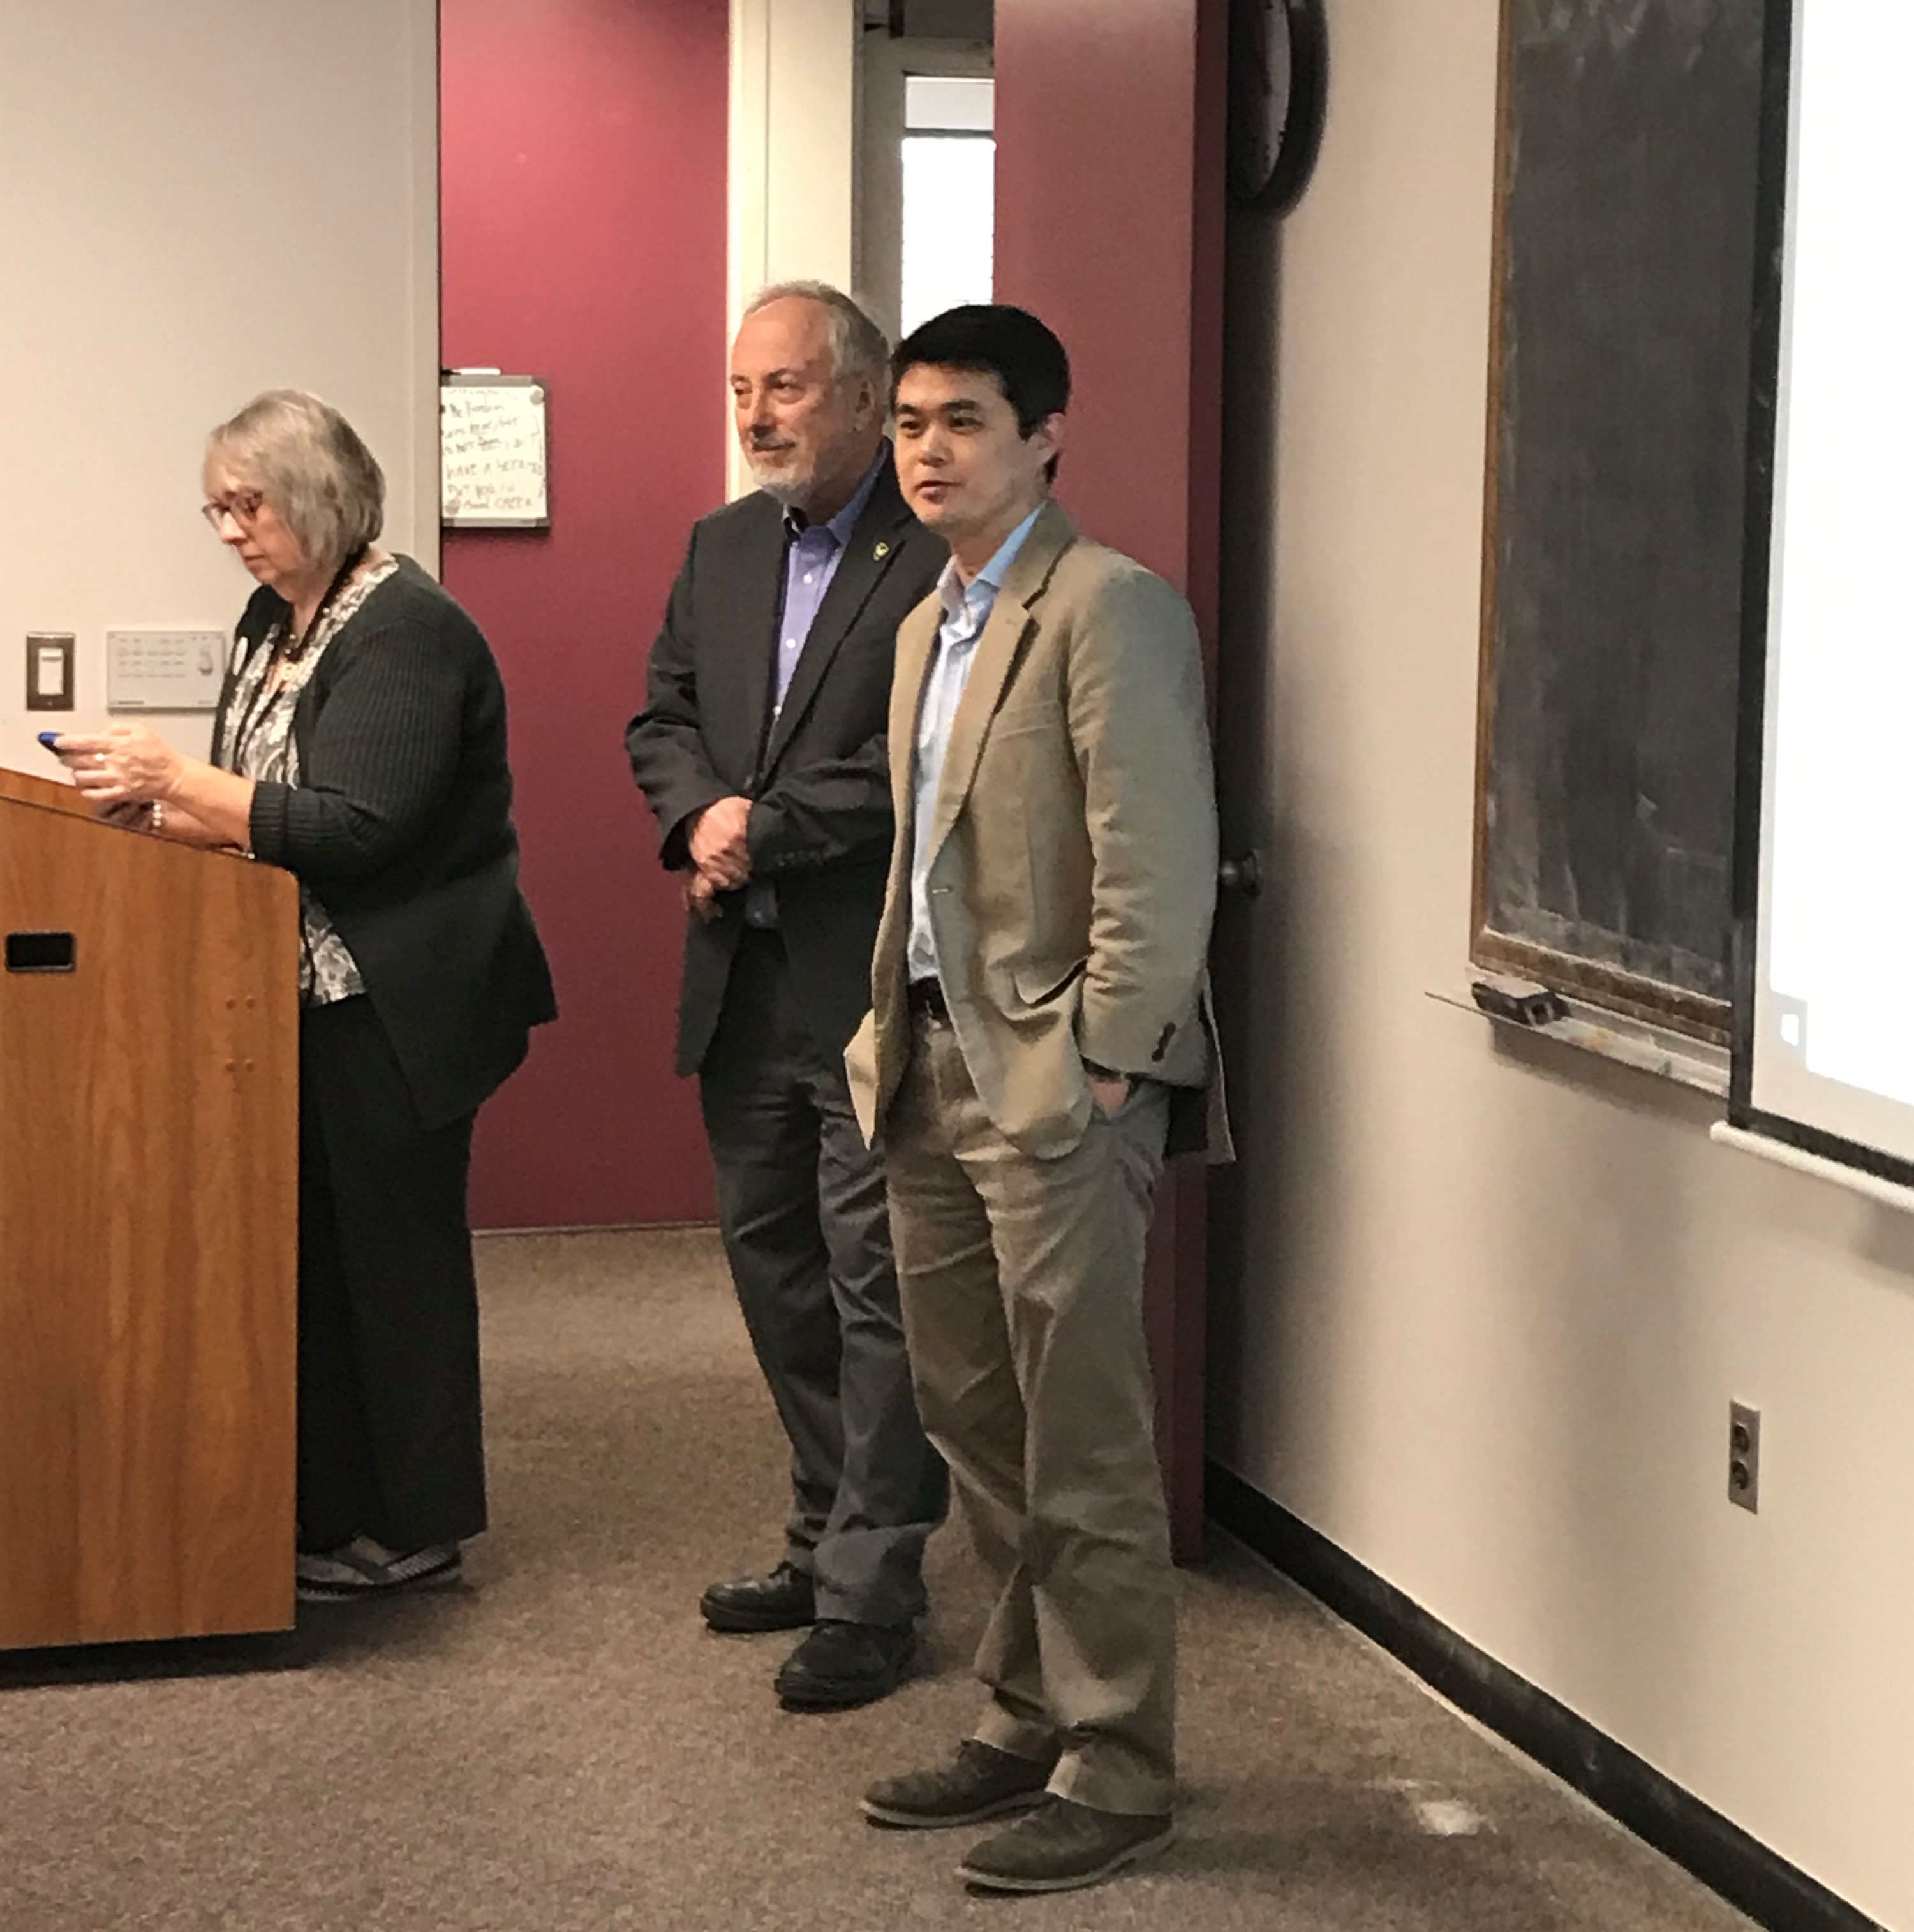 From left to right Academic Advisor Dr. Kimberly Morgan prepares her presentation, while Mathematics Department Chair Dr. Hengguang Li and Associate Department Chair Dr. Daniel Drucker prepare to welcome the students.